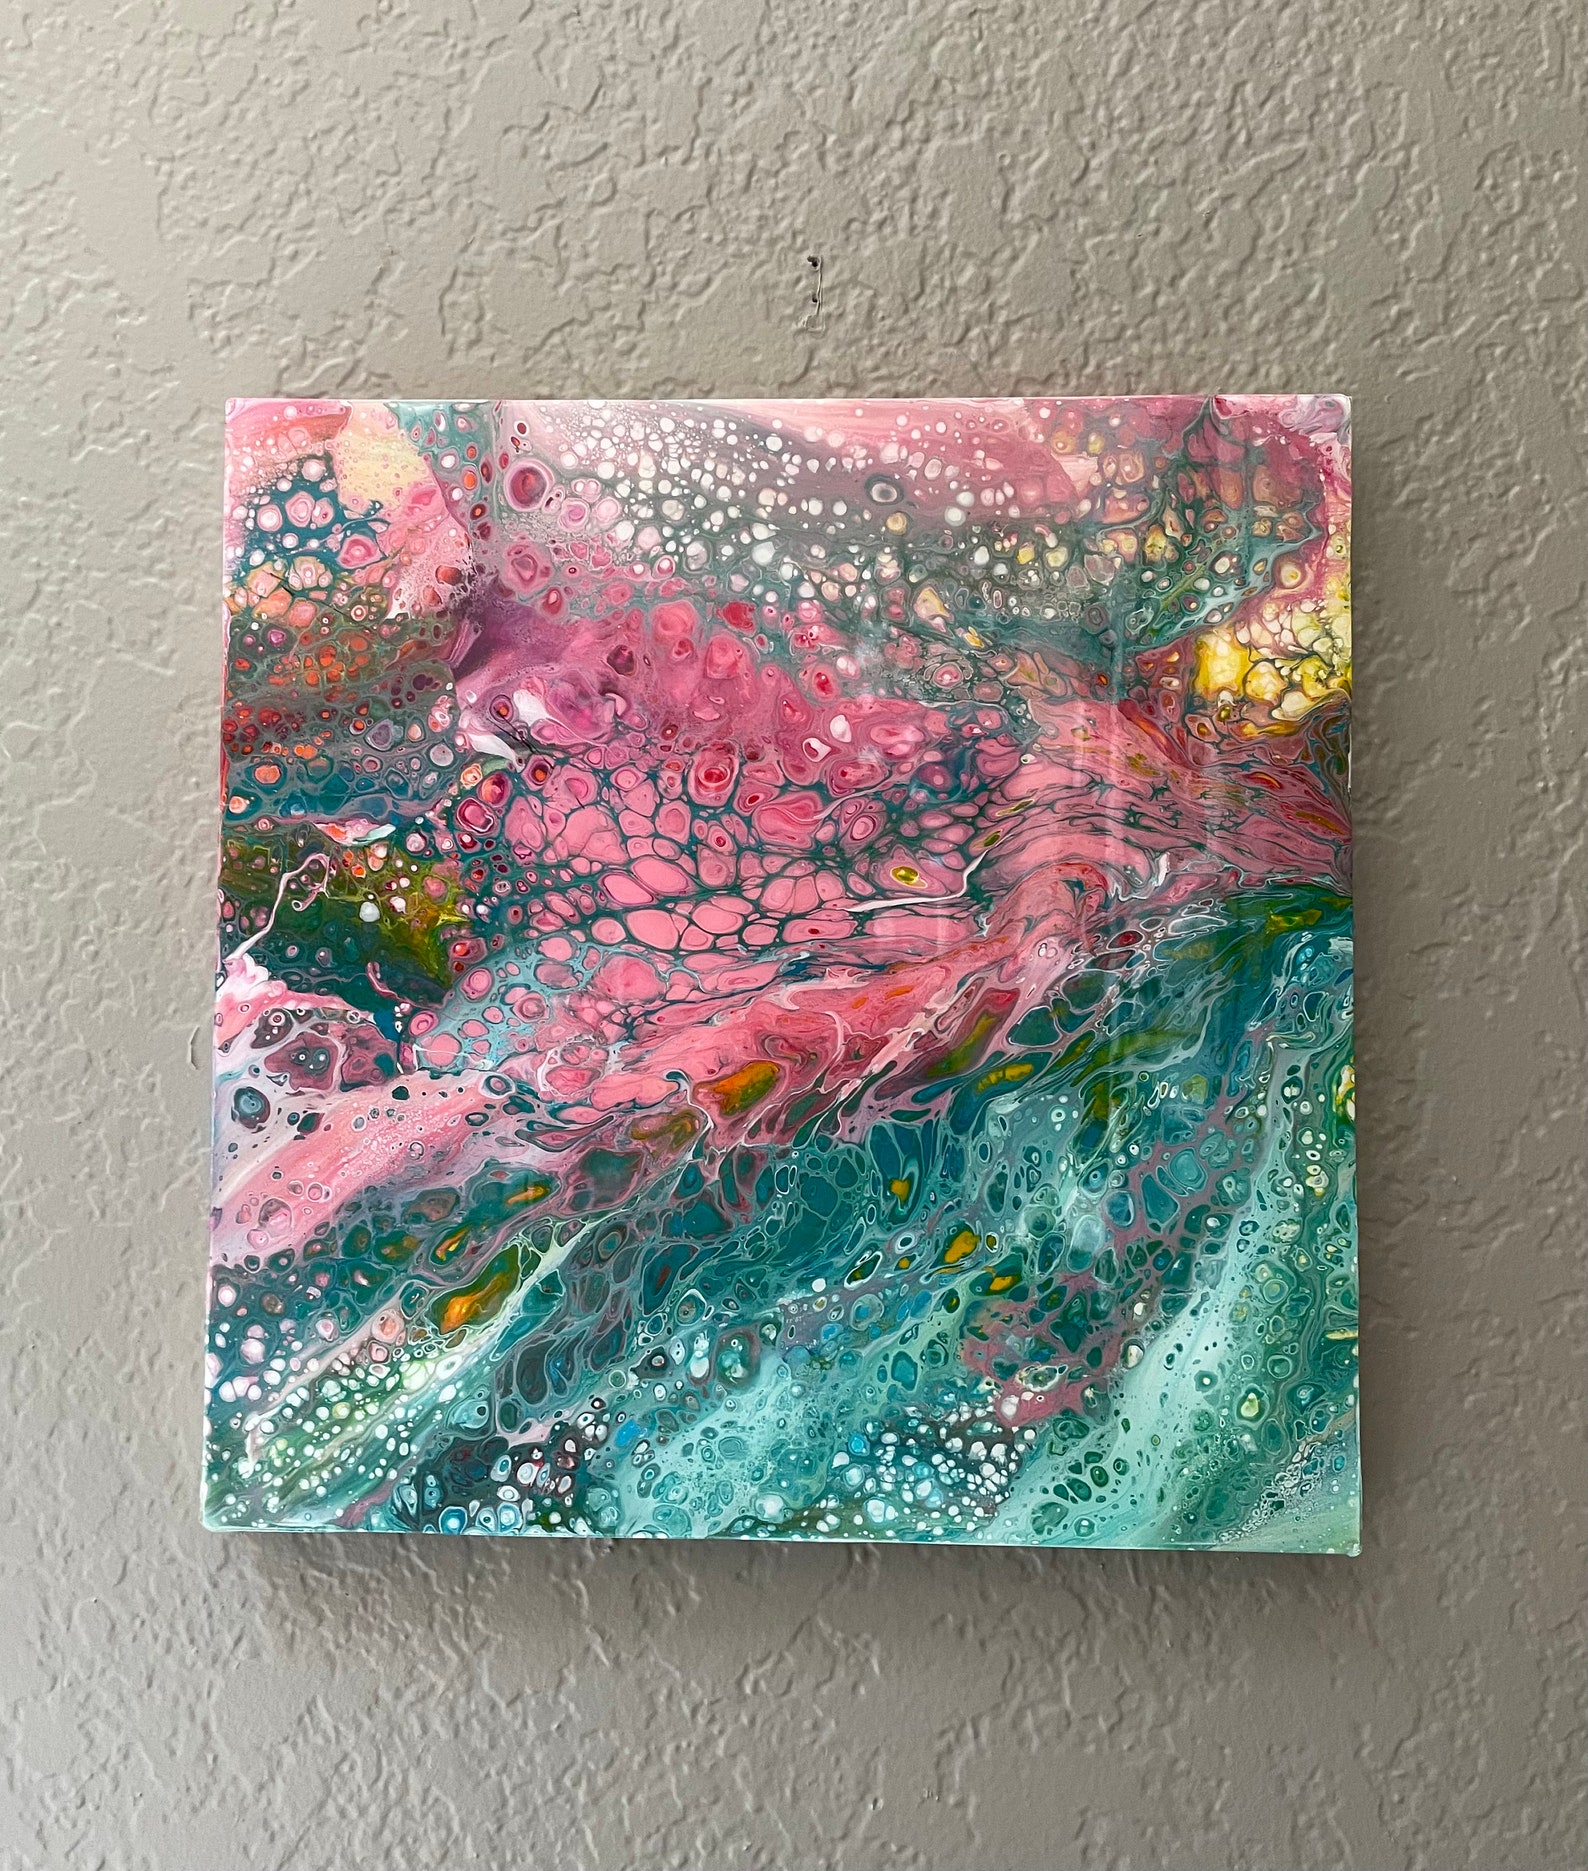 Acrylic Paint Pour Pink Teal Yellow and White | Etsy